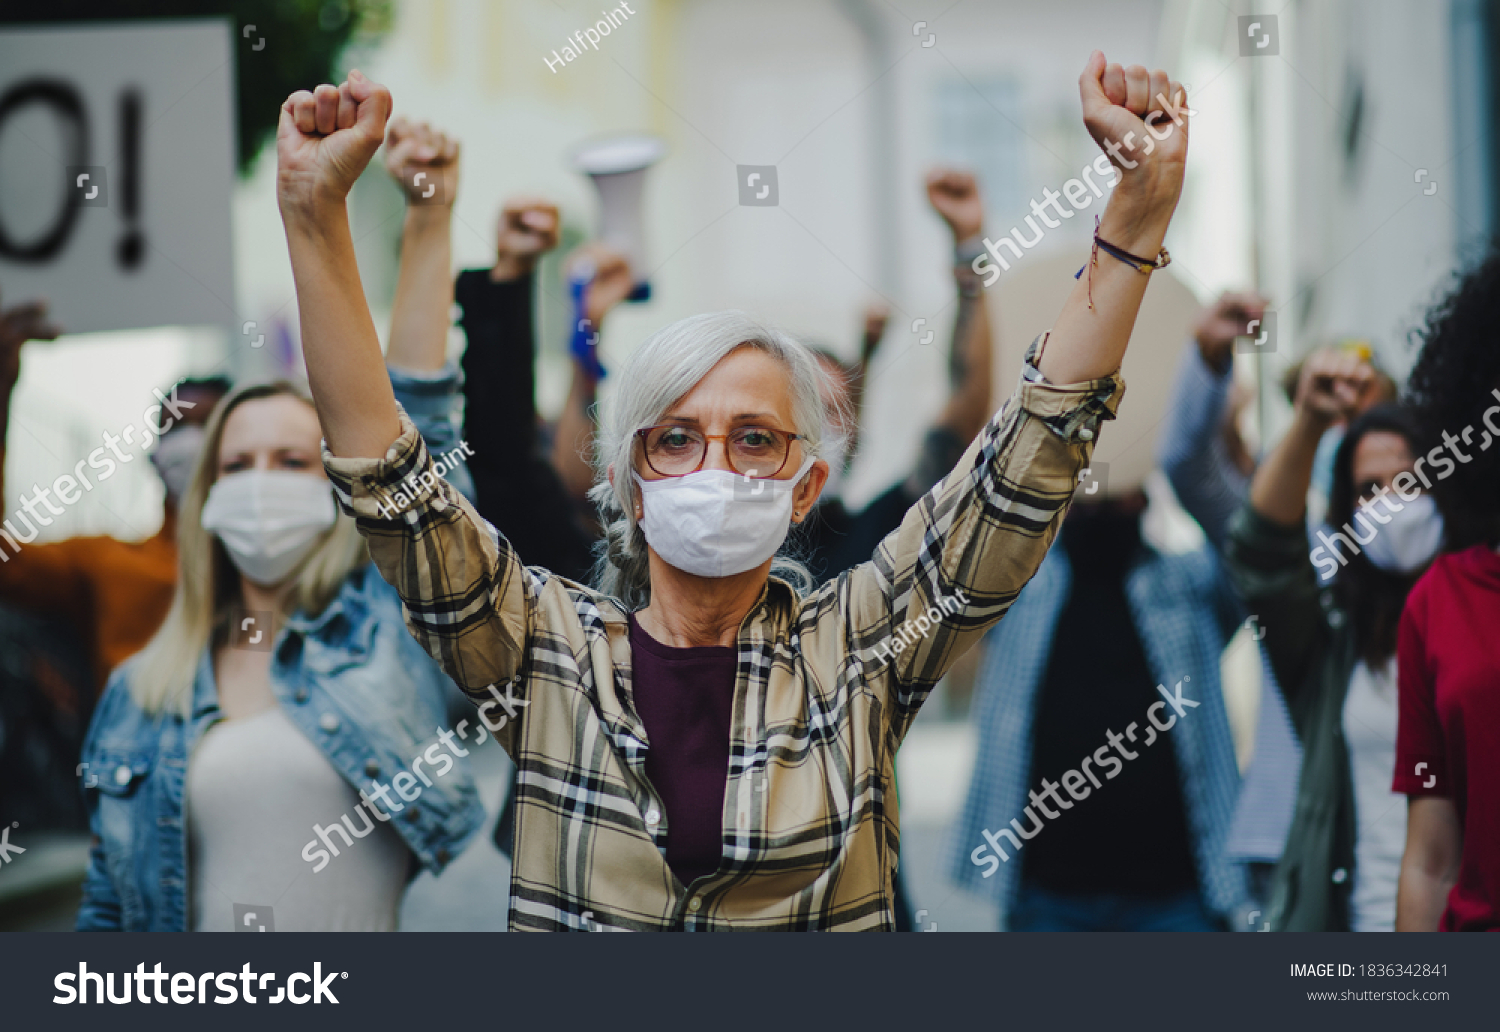 Group of people activists protesting on streets, women march, demonstration and coronavirus concept. #1836342841